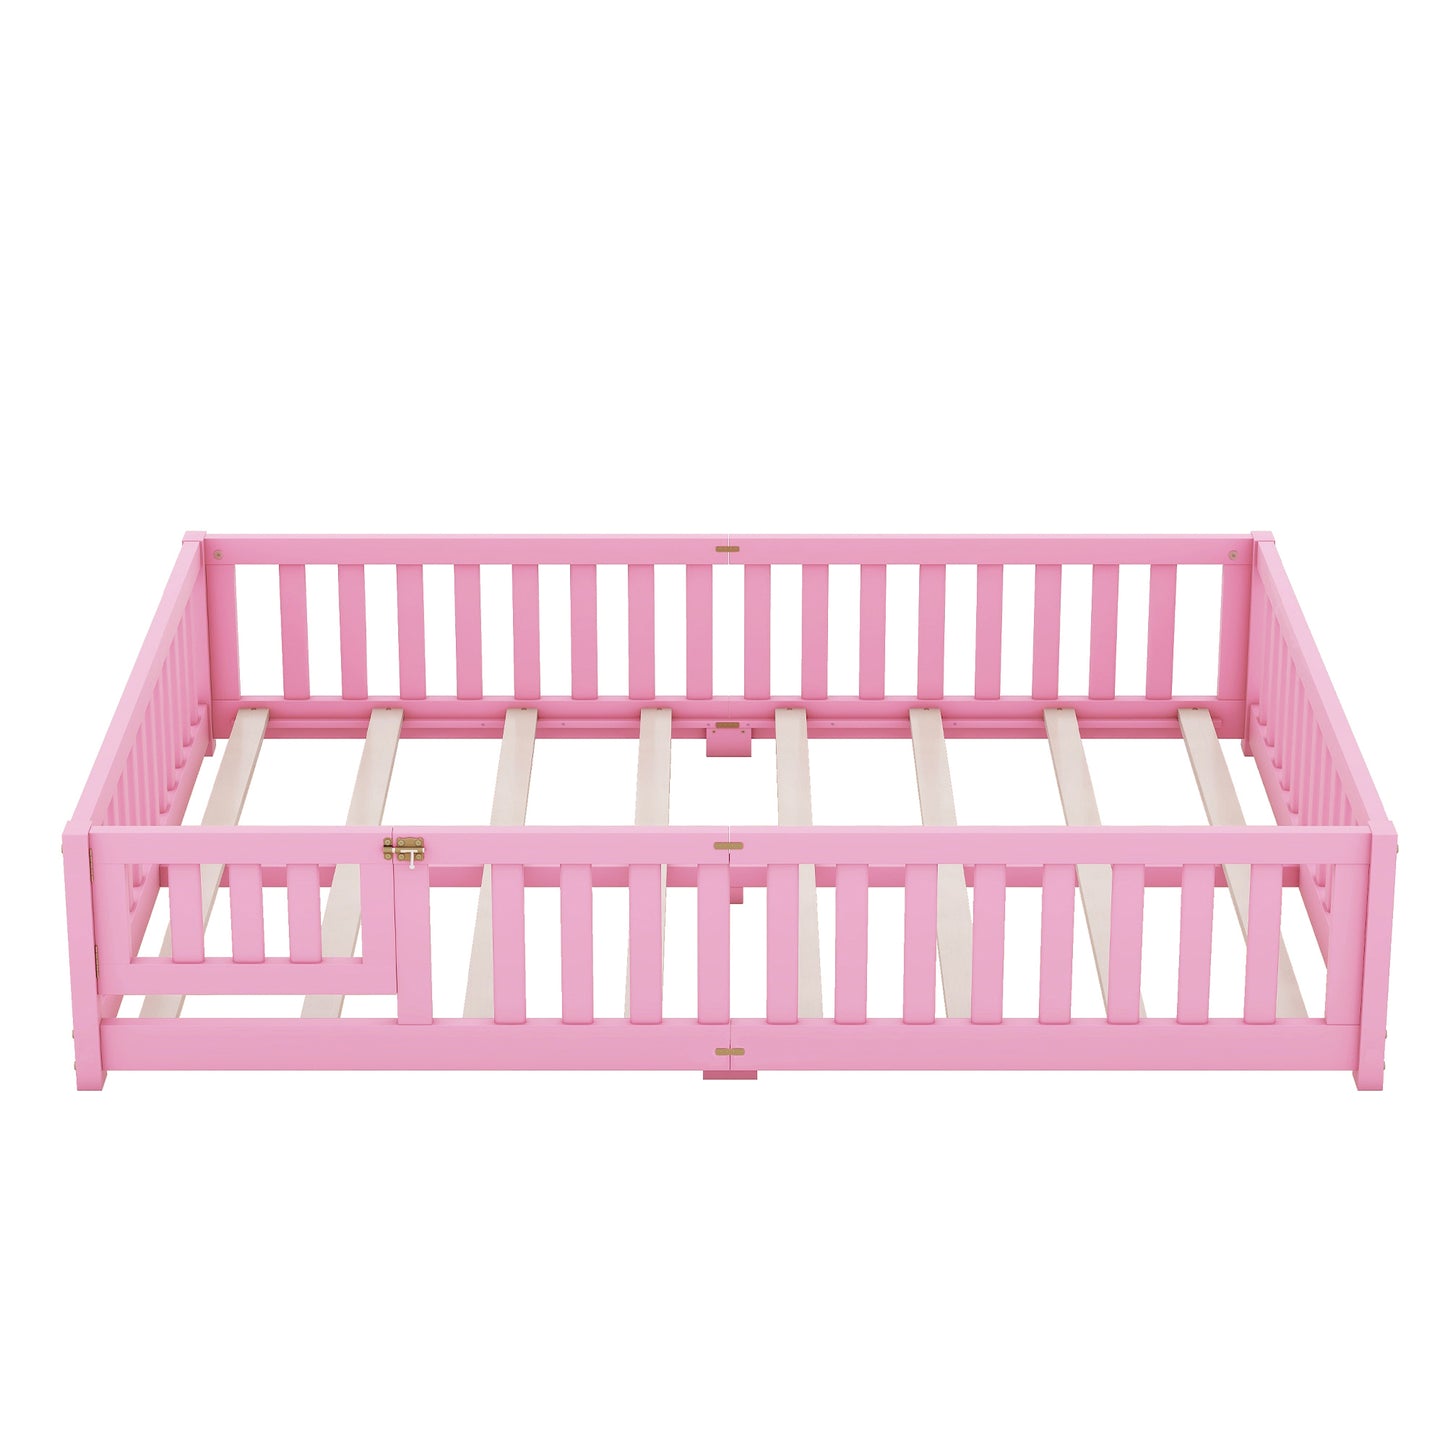 Queen Size Bed Floor Platform Bed with Safety Guardrails and Door for Kids, Pink